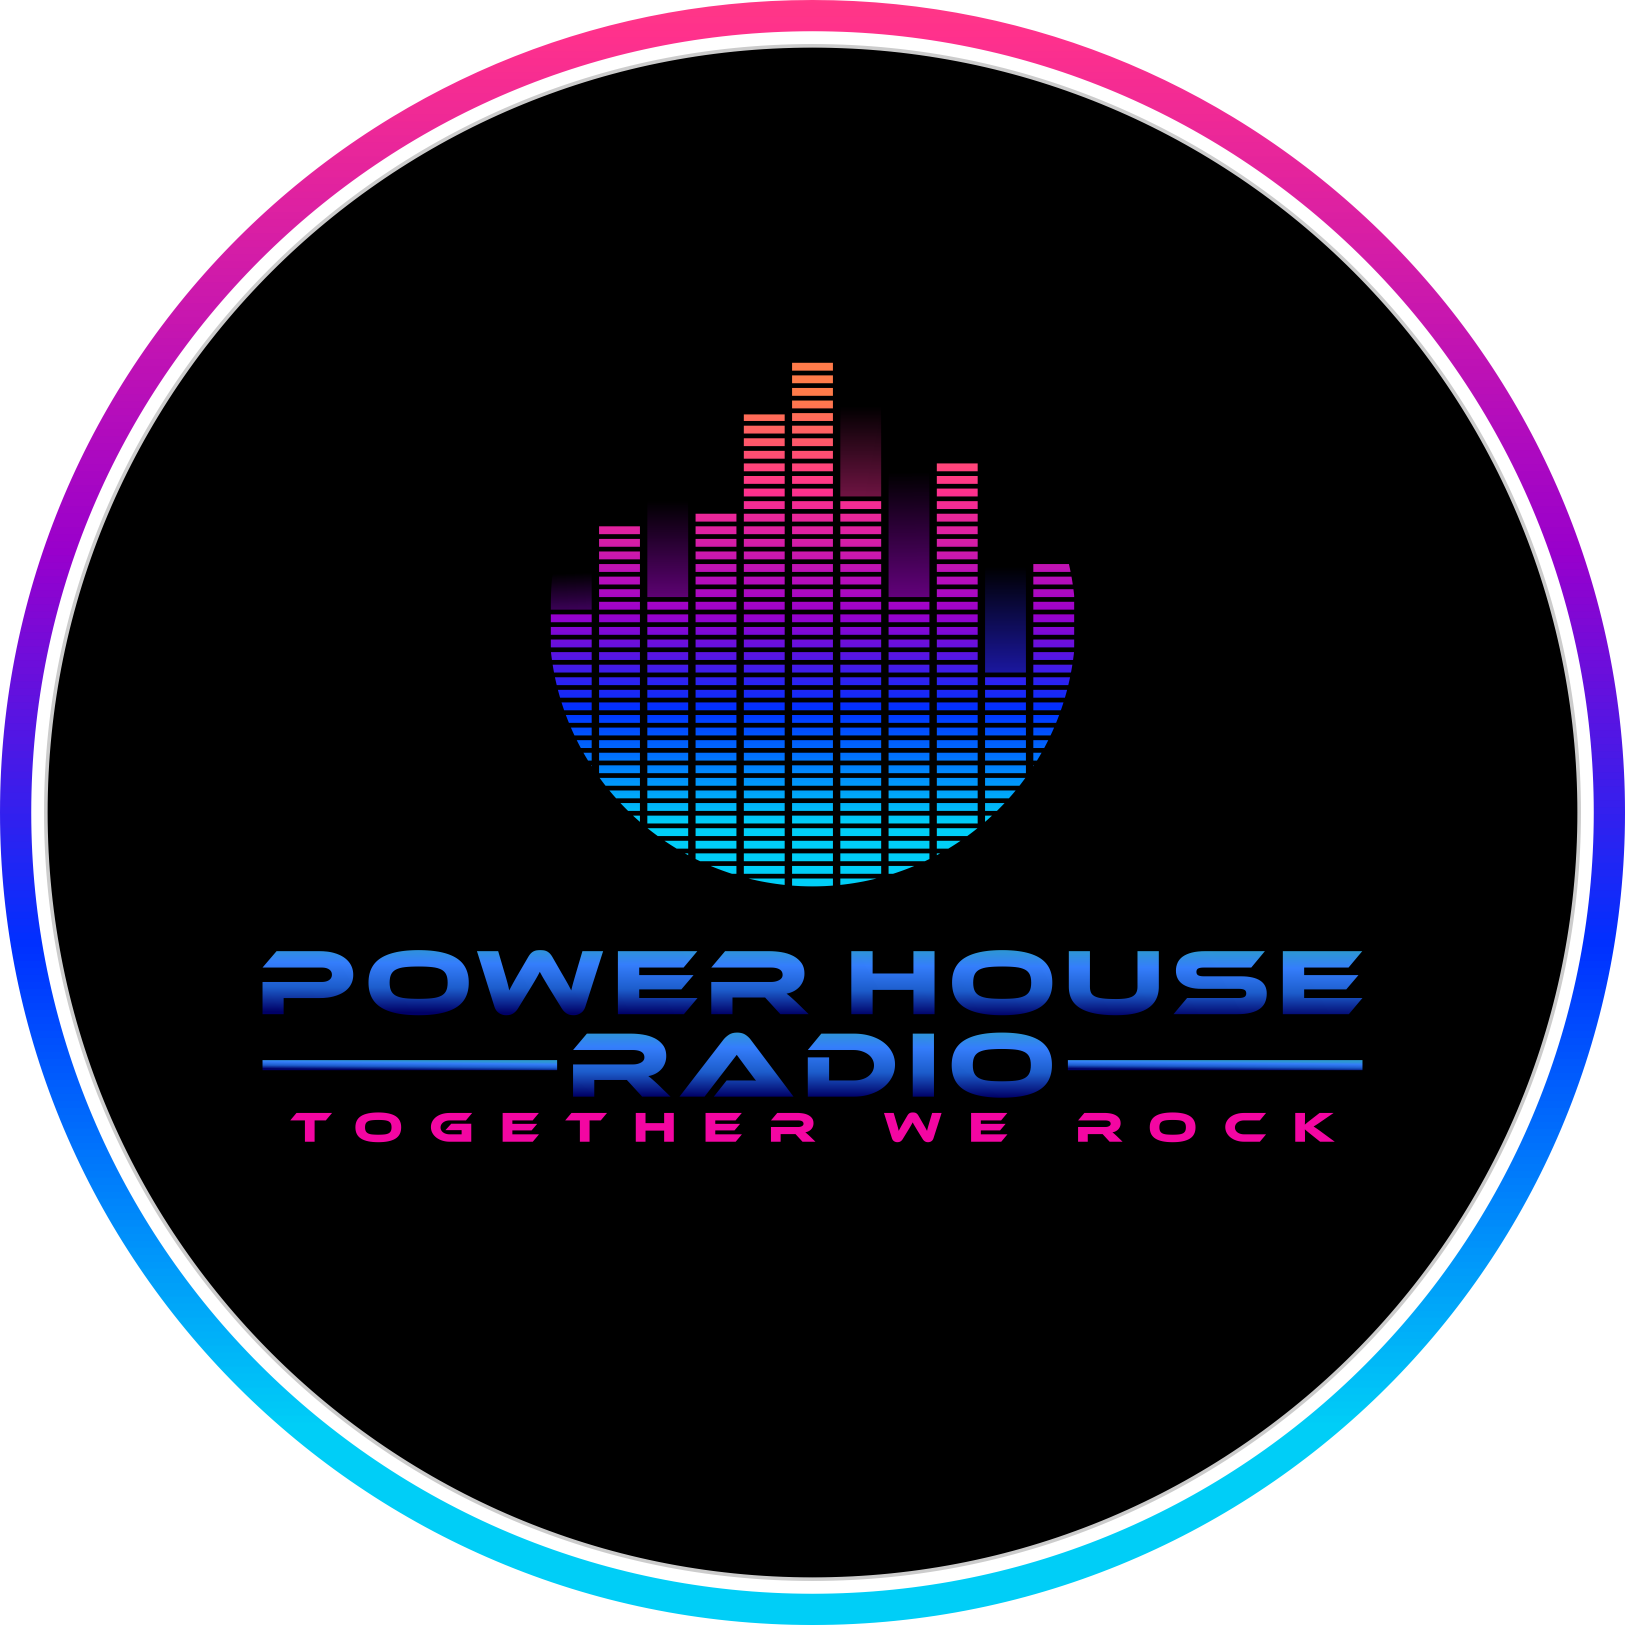 Art for POWERHOUSE2 by Untitled Artist